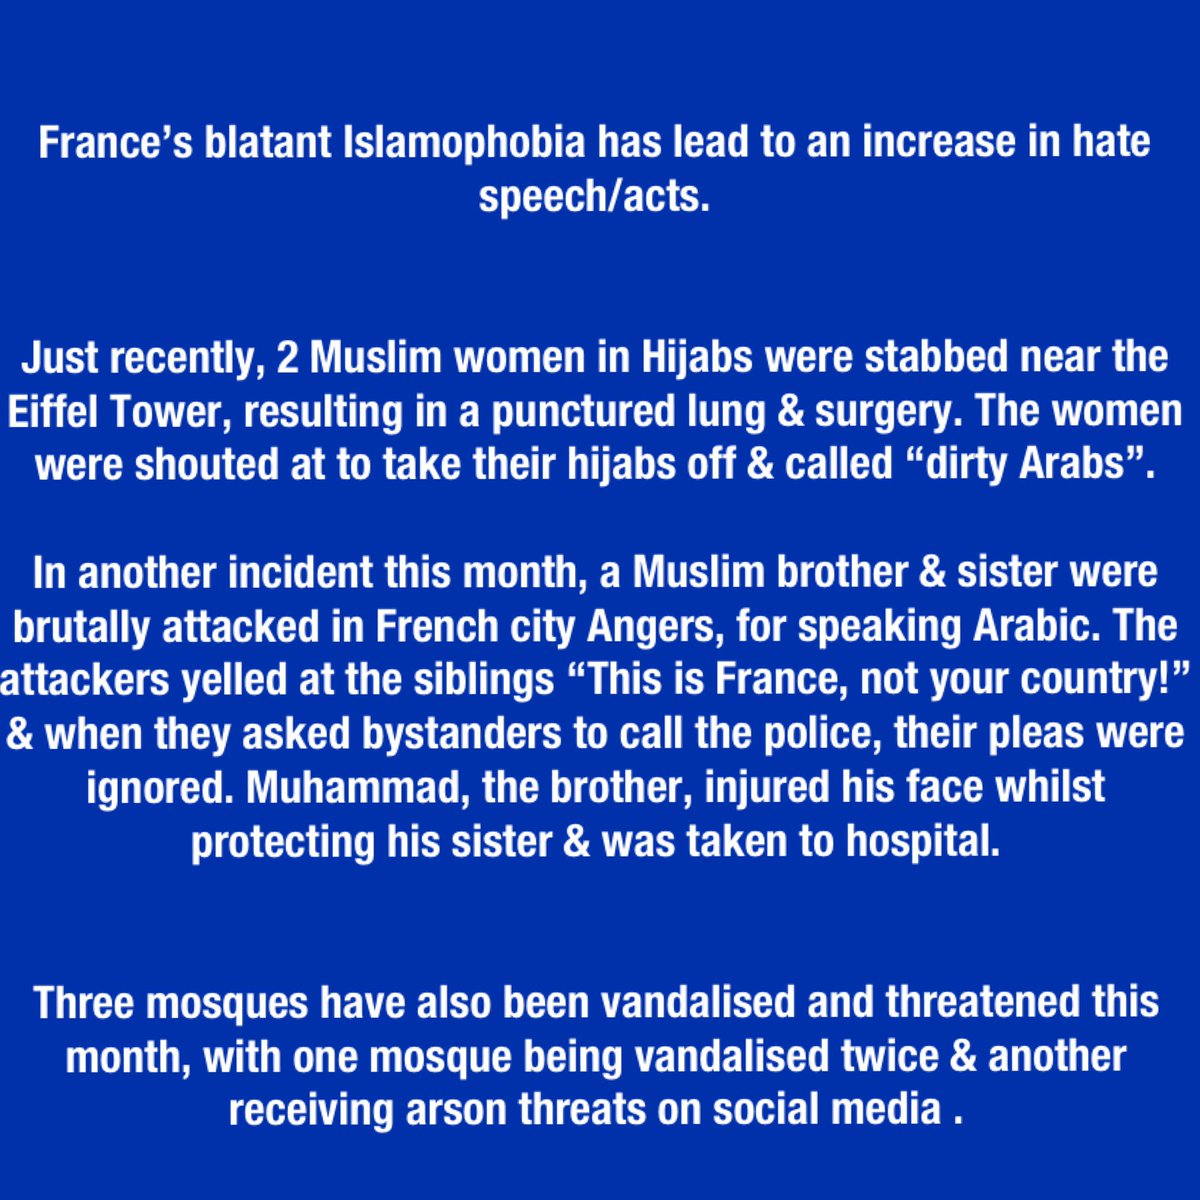 Why there’s tension between France & Muslims right now (pt 2):